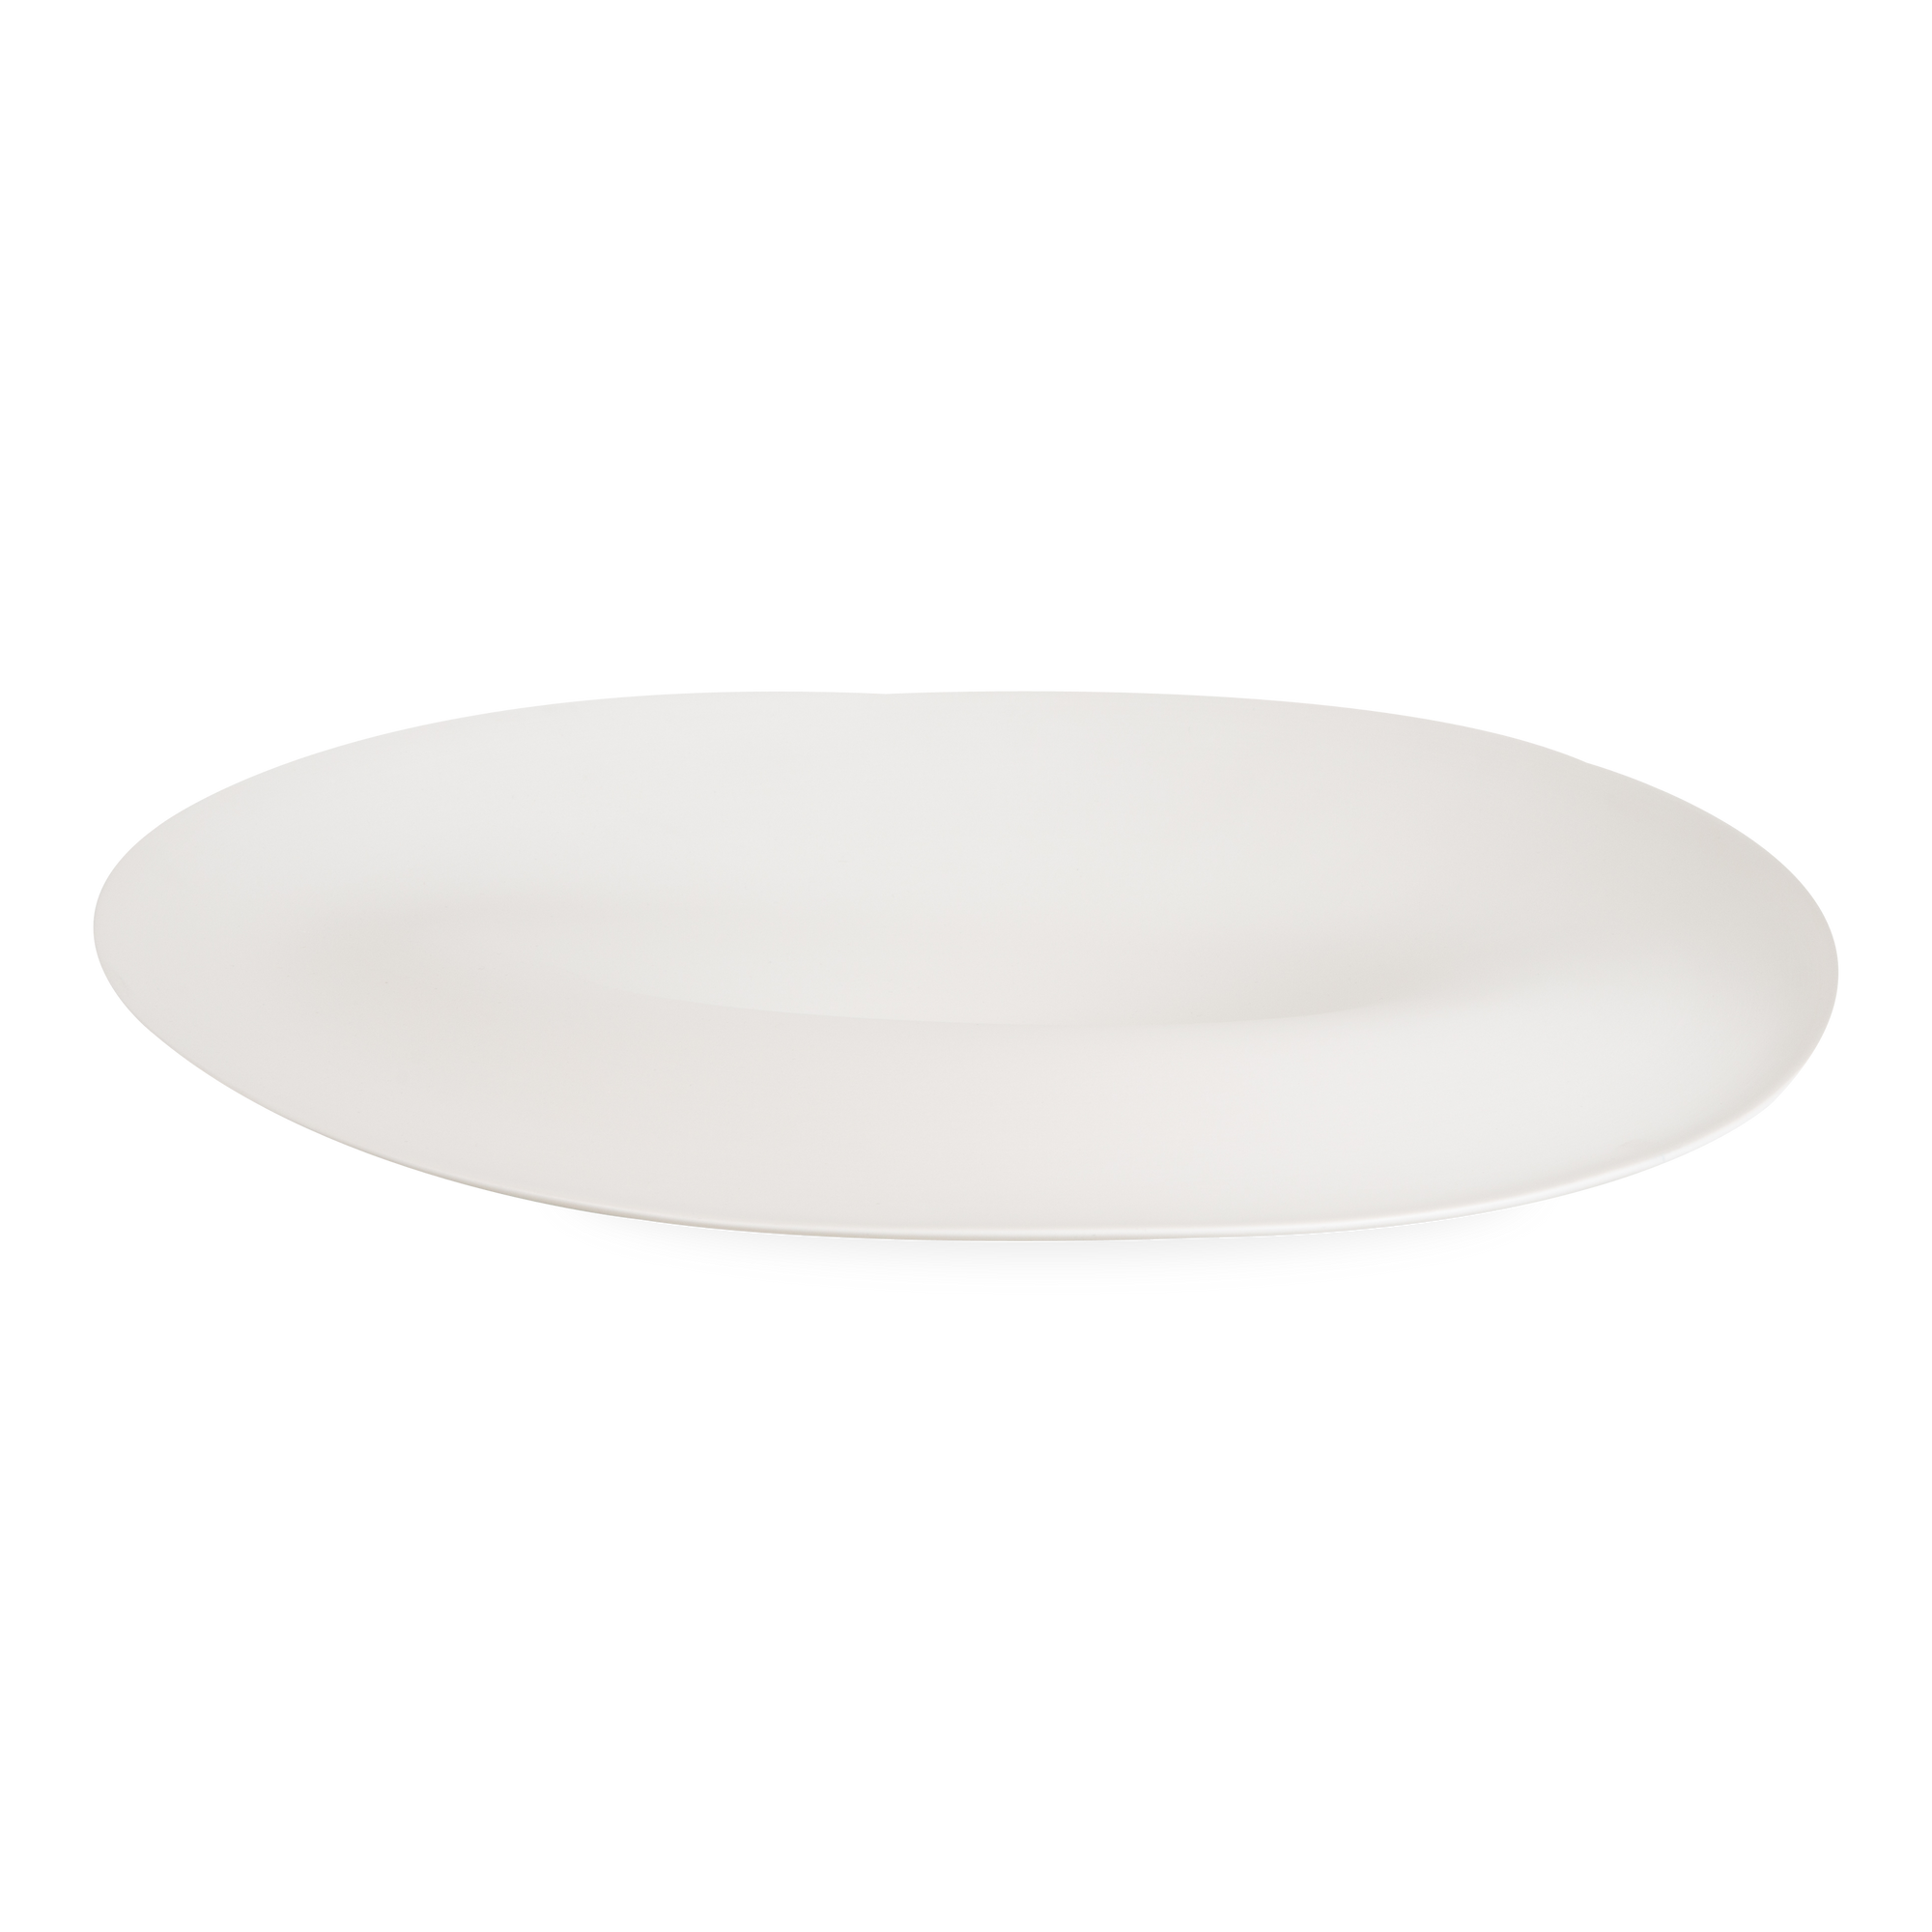 The Trottola Bowl is completely handmade in Italy and is characterized by a unique design that portrays a ripple on the surface of a white cream tide.